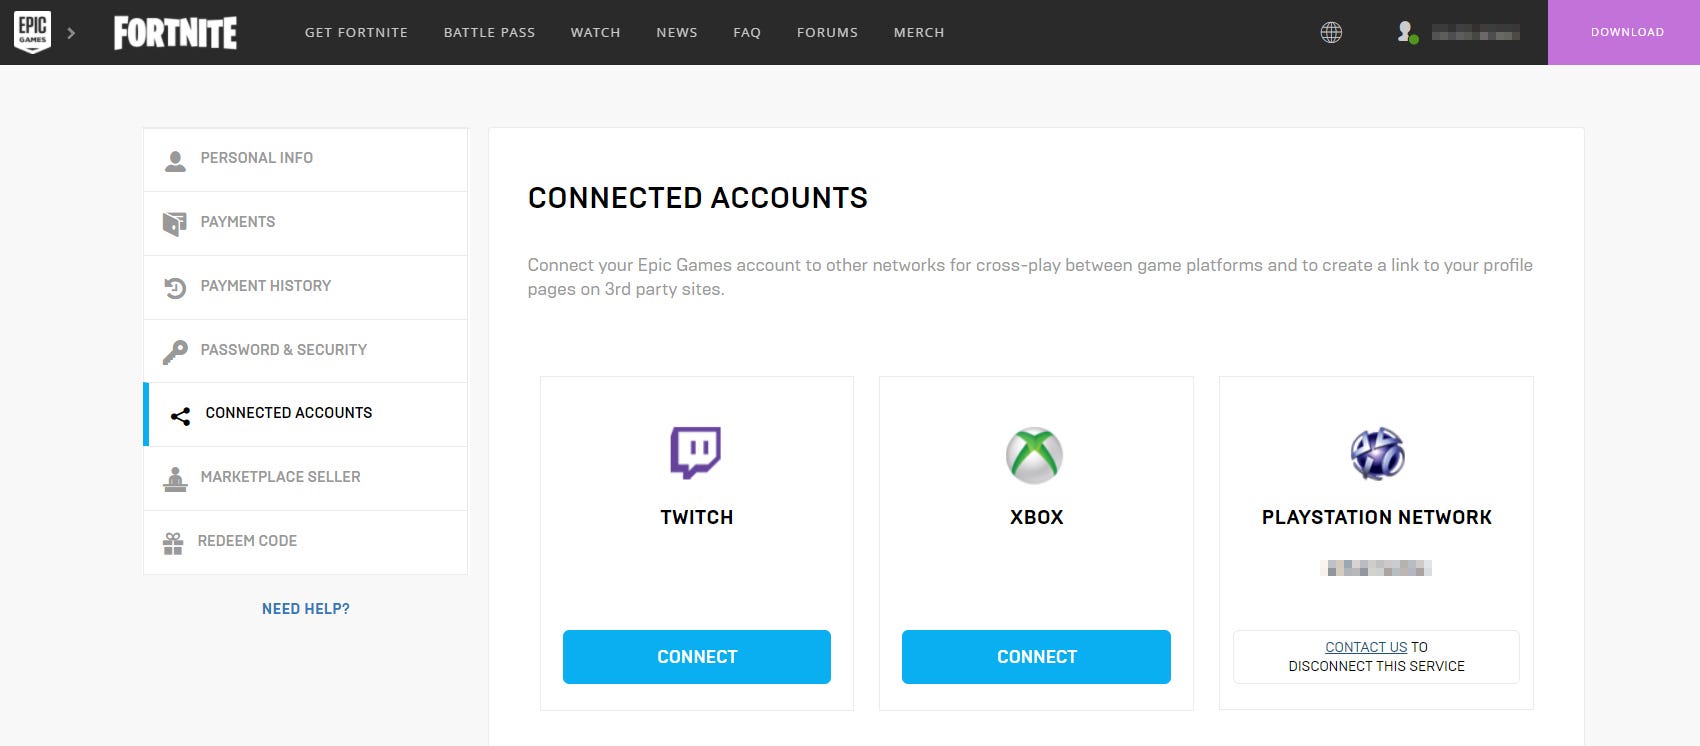 How To Link PSN Account To Epic Games 